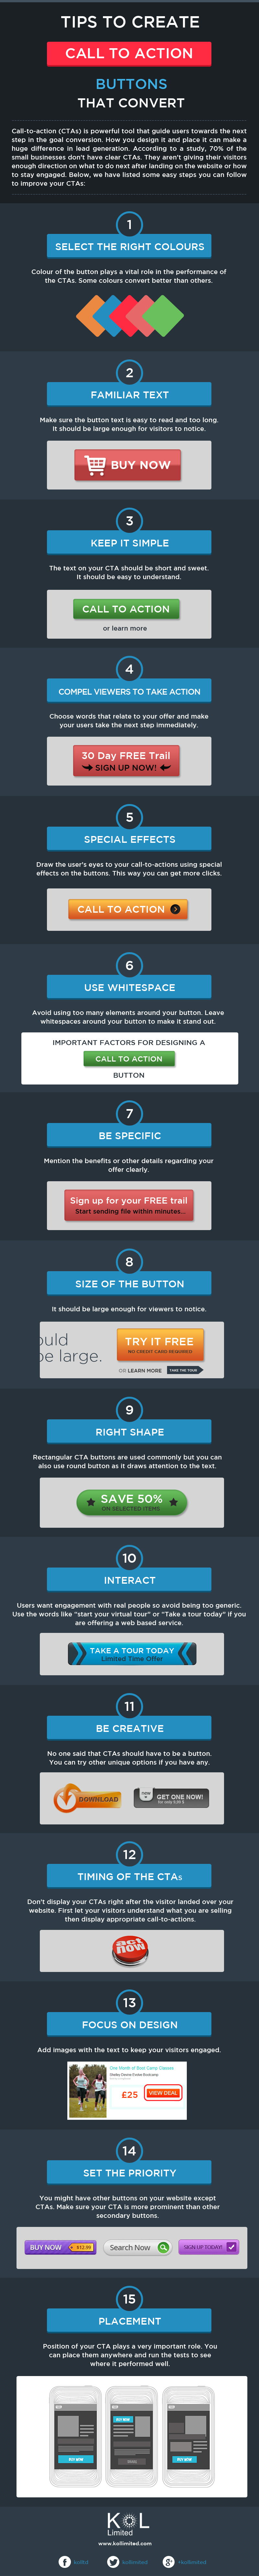 Create Call-To-Action Buttons That Convert